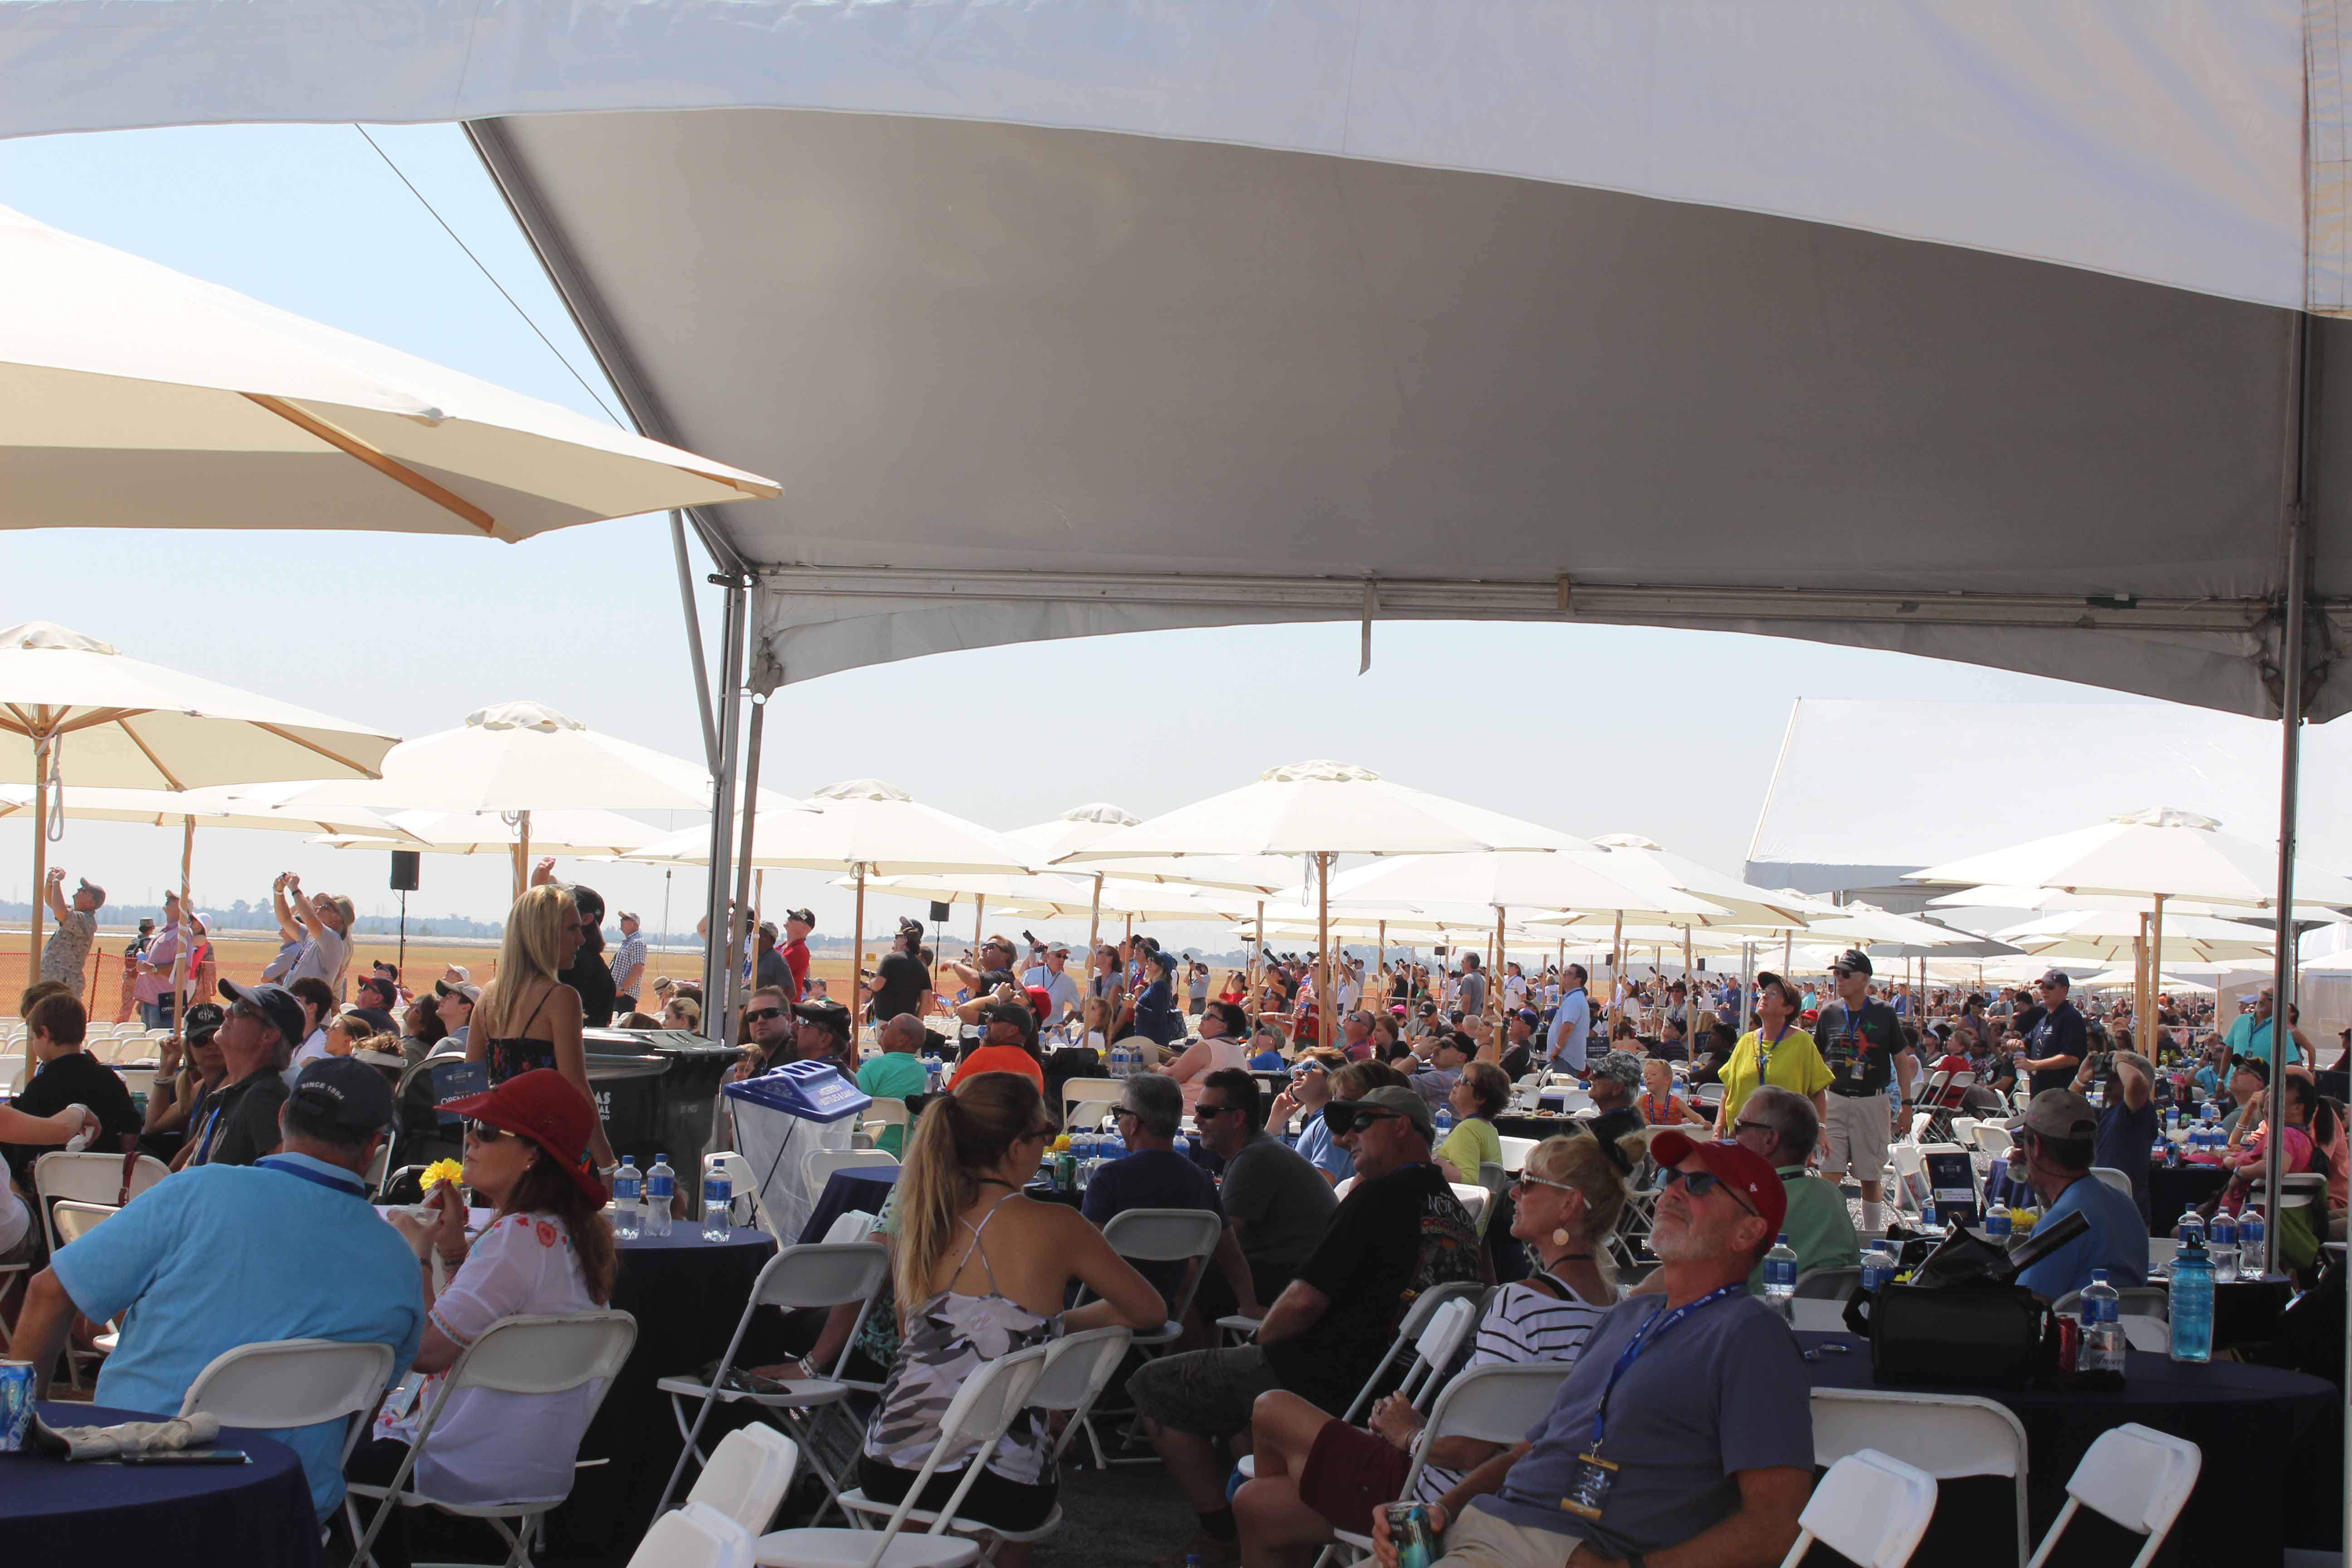 crowd sitting at tables under a large white tent at an air show chalet